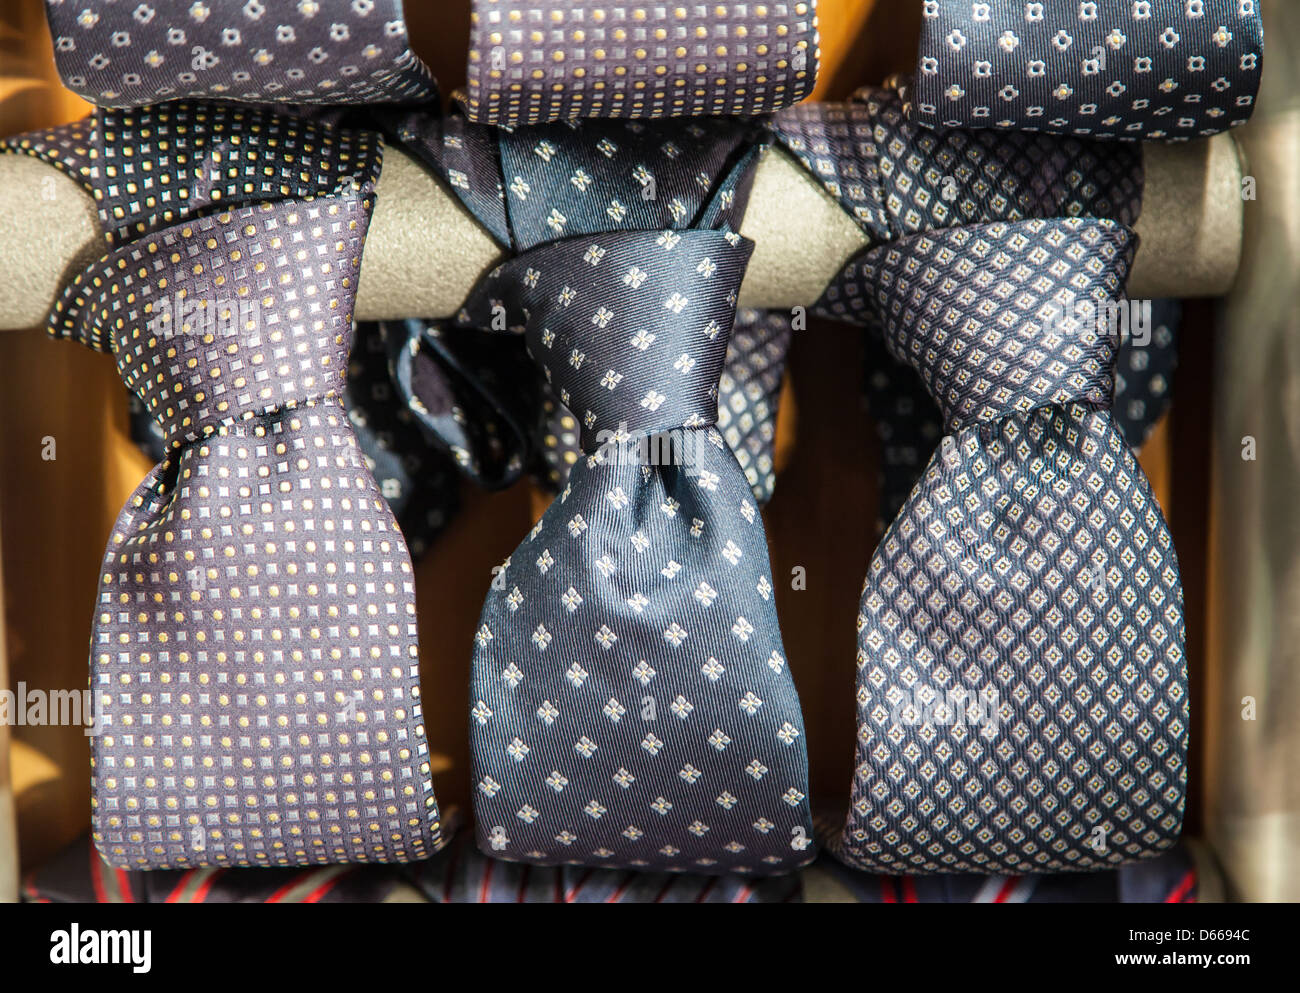 Milano - Italy. Detail of ties in a luxury shop Stock Photo - Alamy